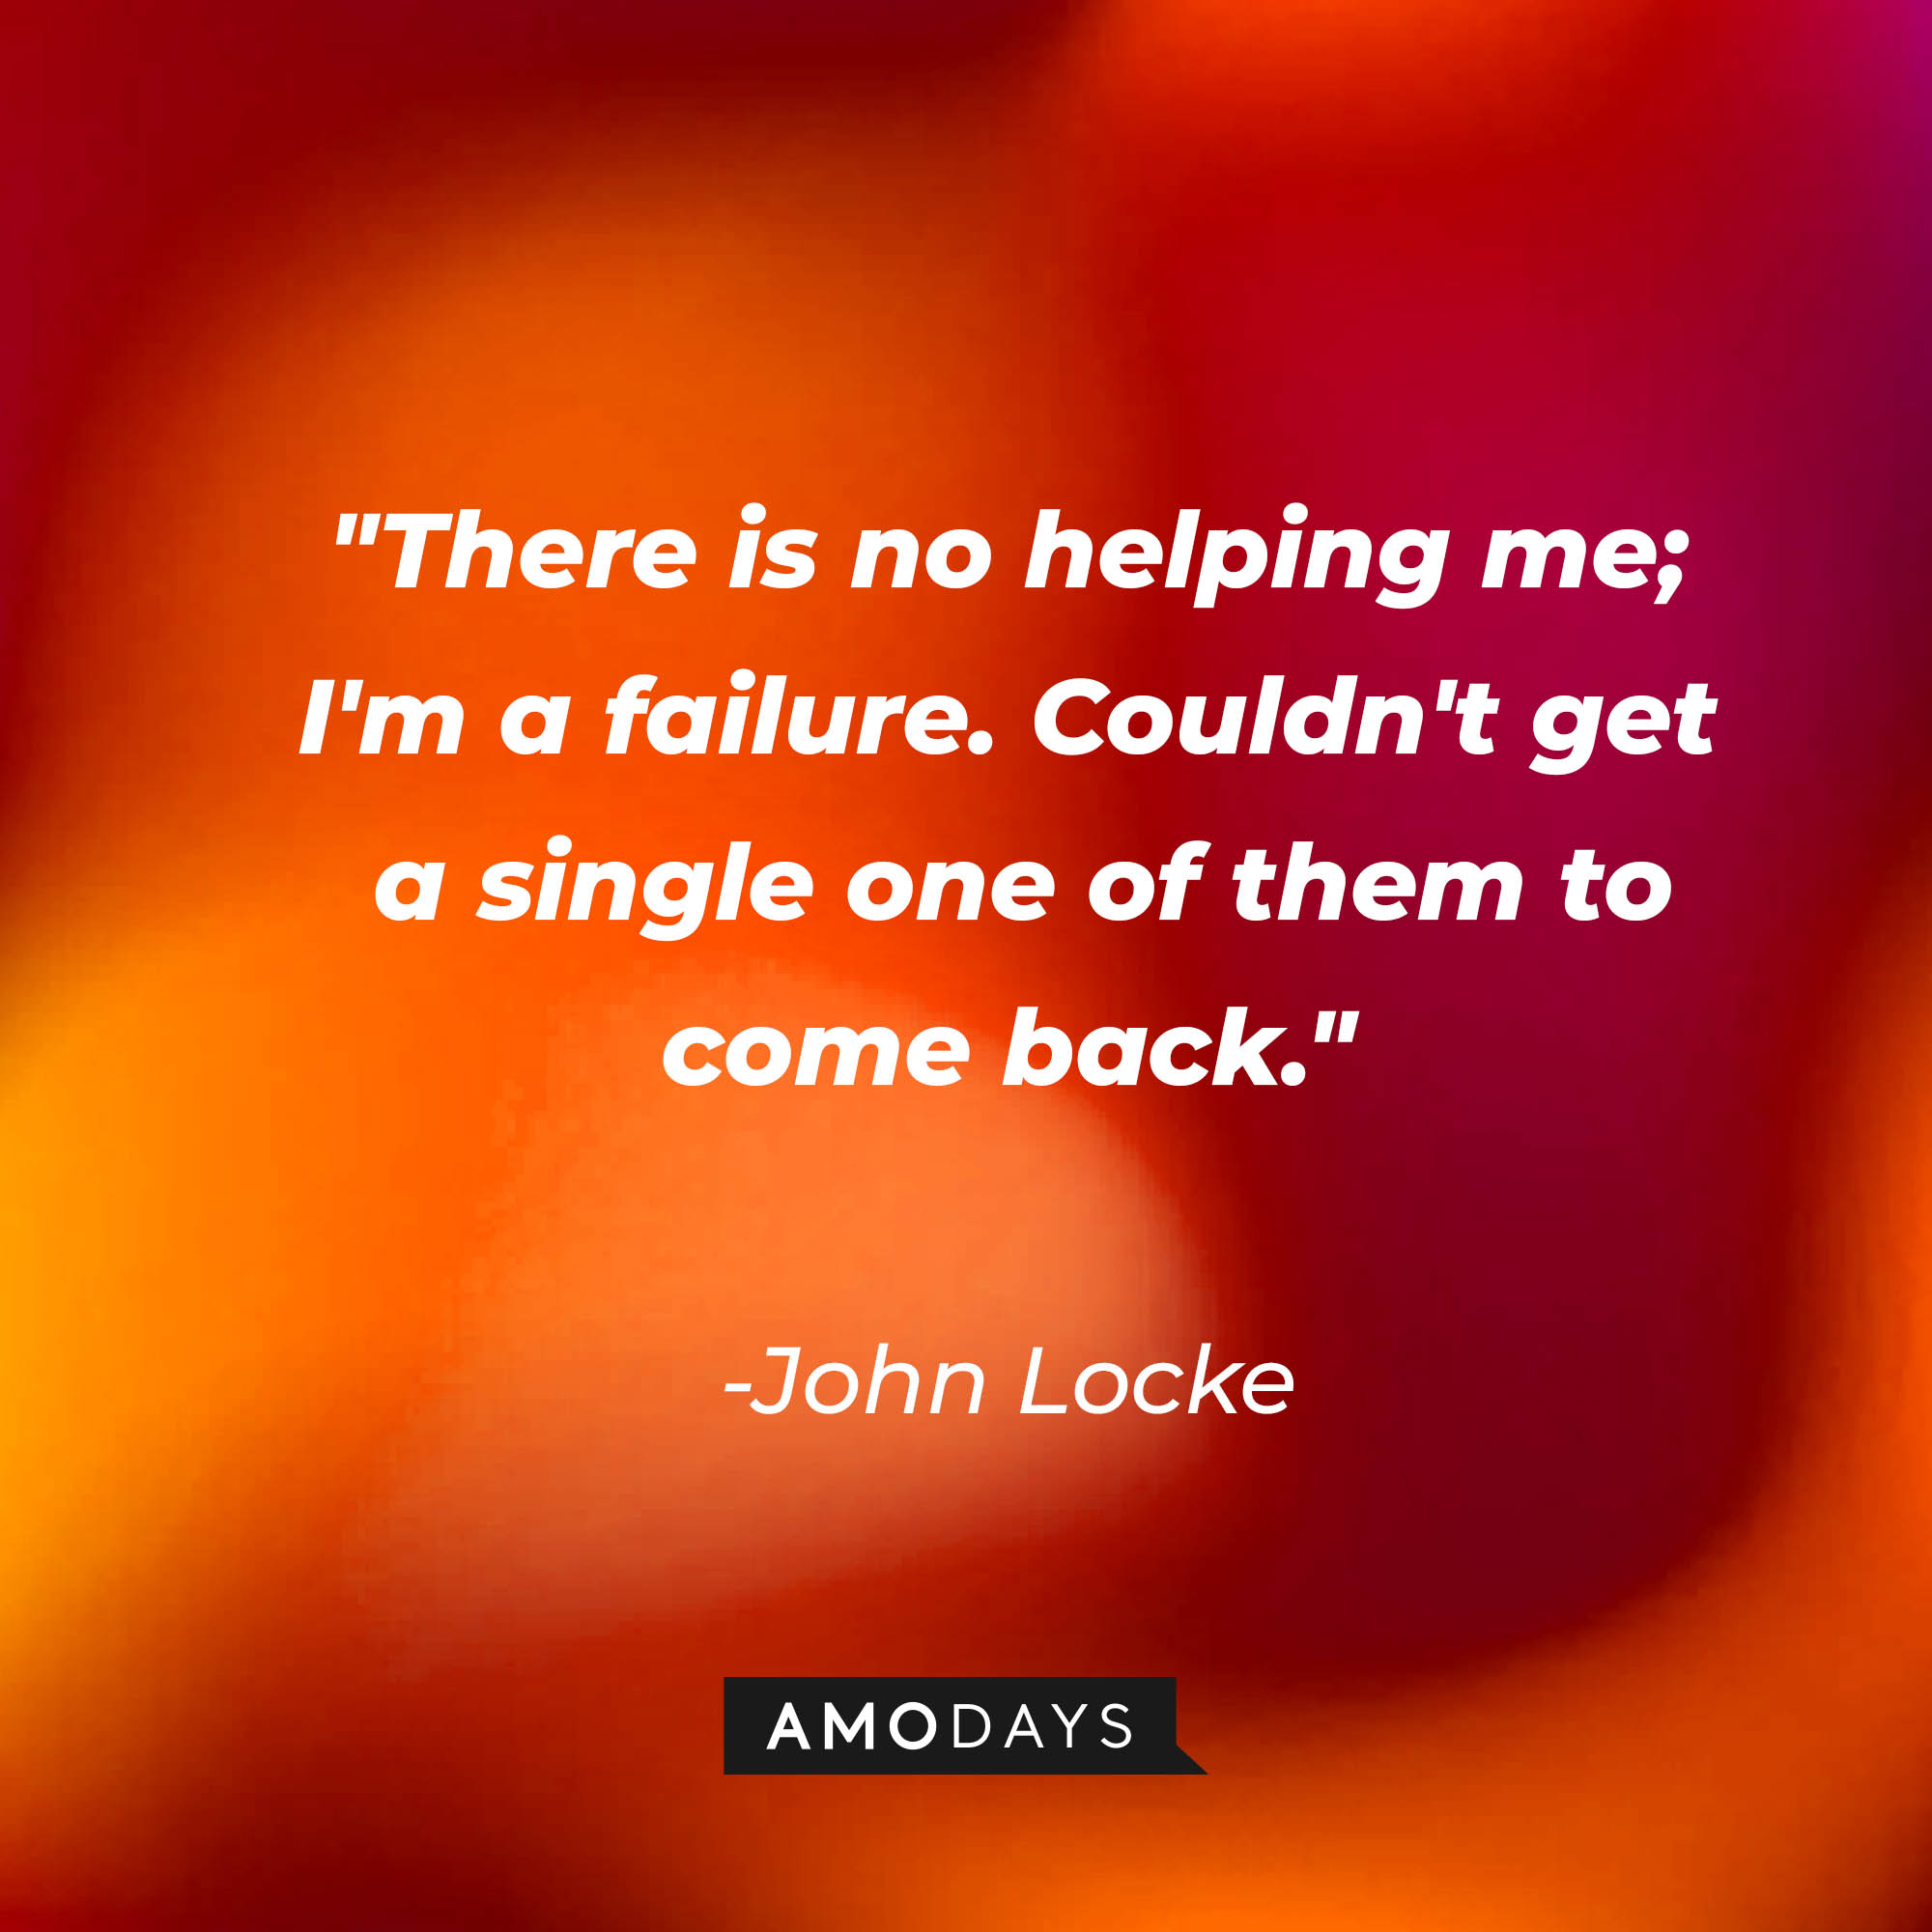 John Locke's quote: "There is no helping me; I'm a failure. Couldn't get a single one of them to come back." | Source: AmoDays